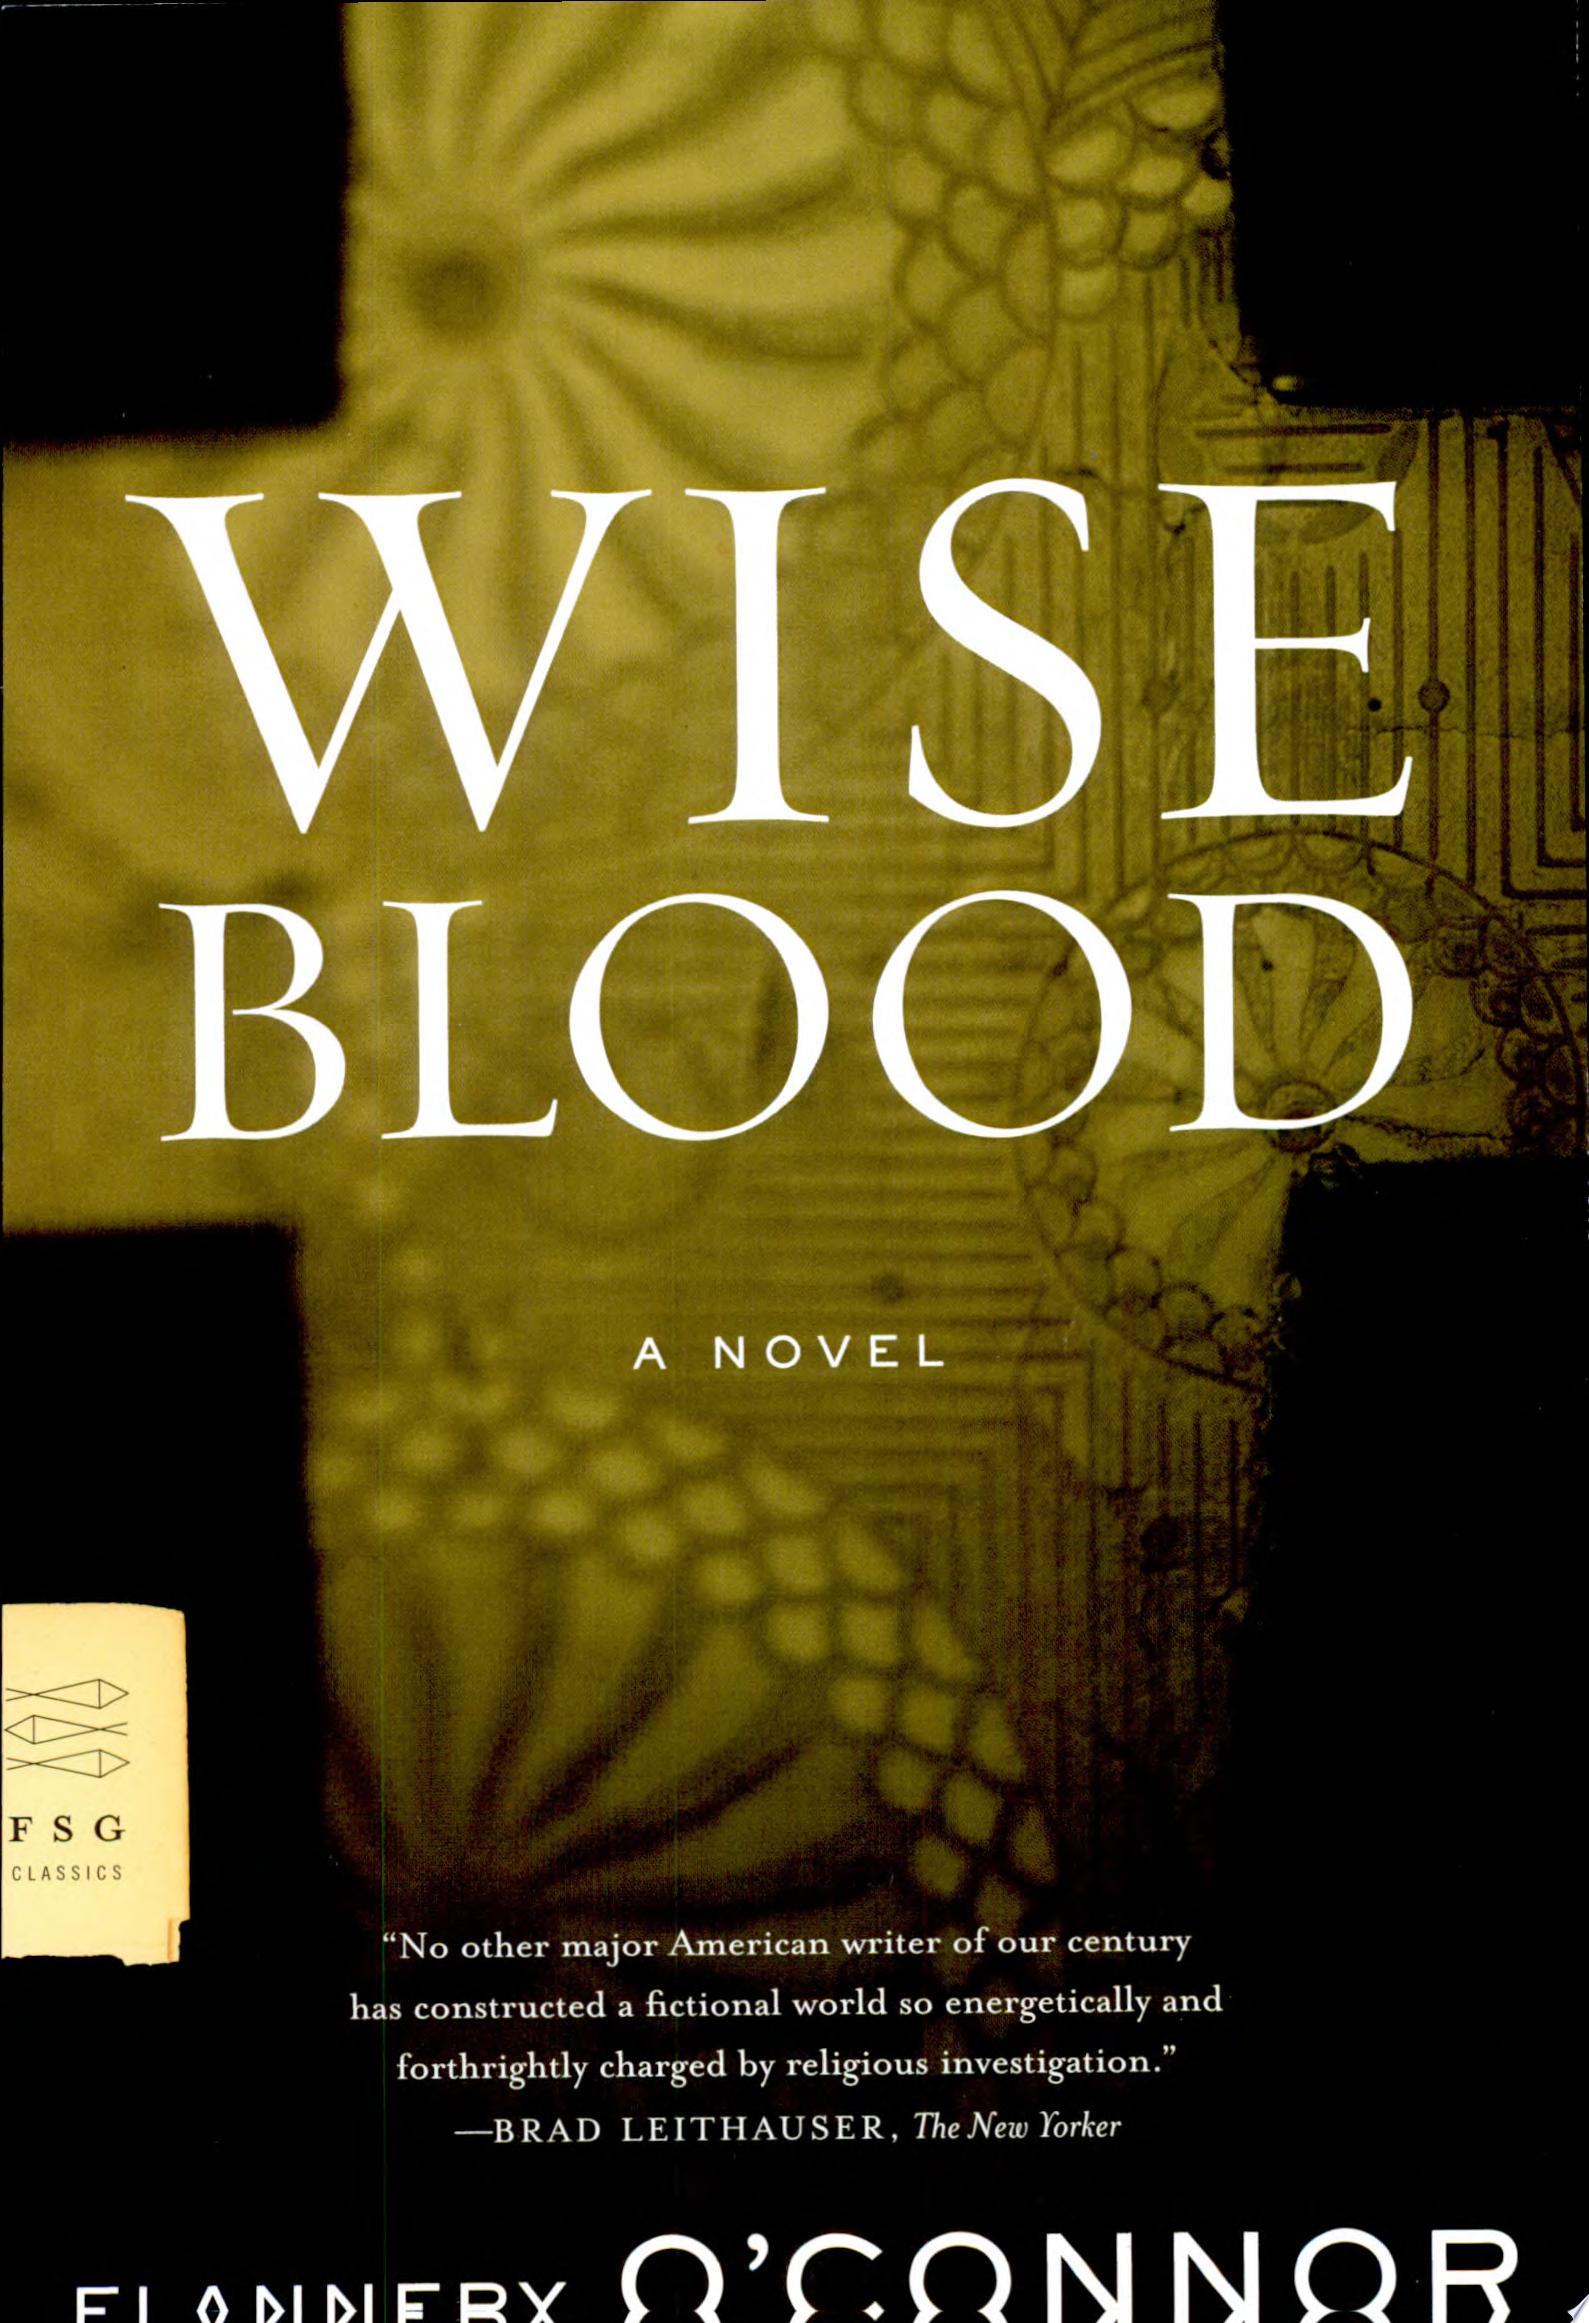 Image for "Wise Blood"